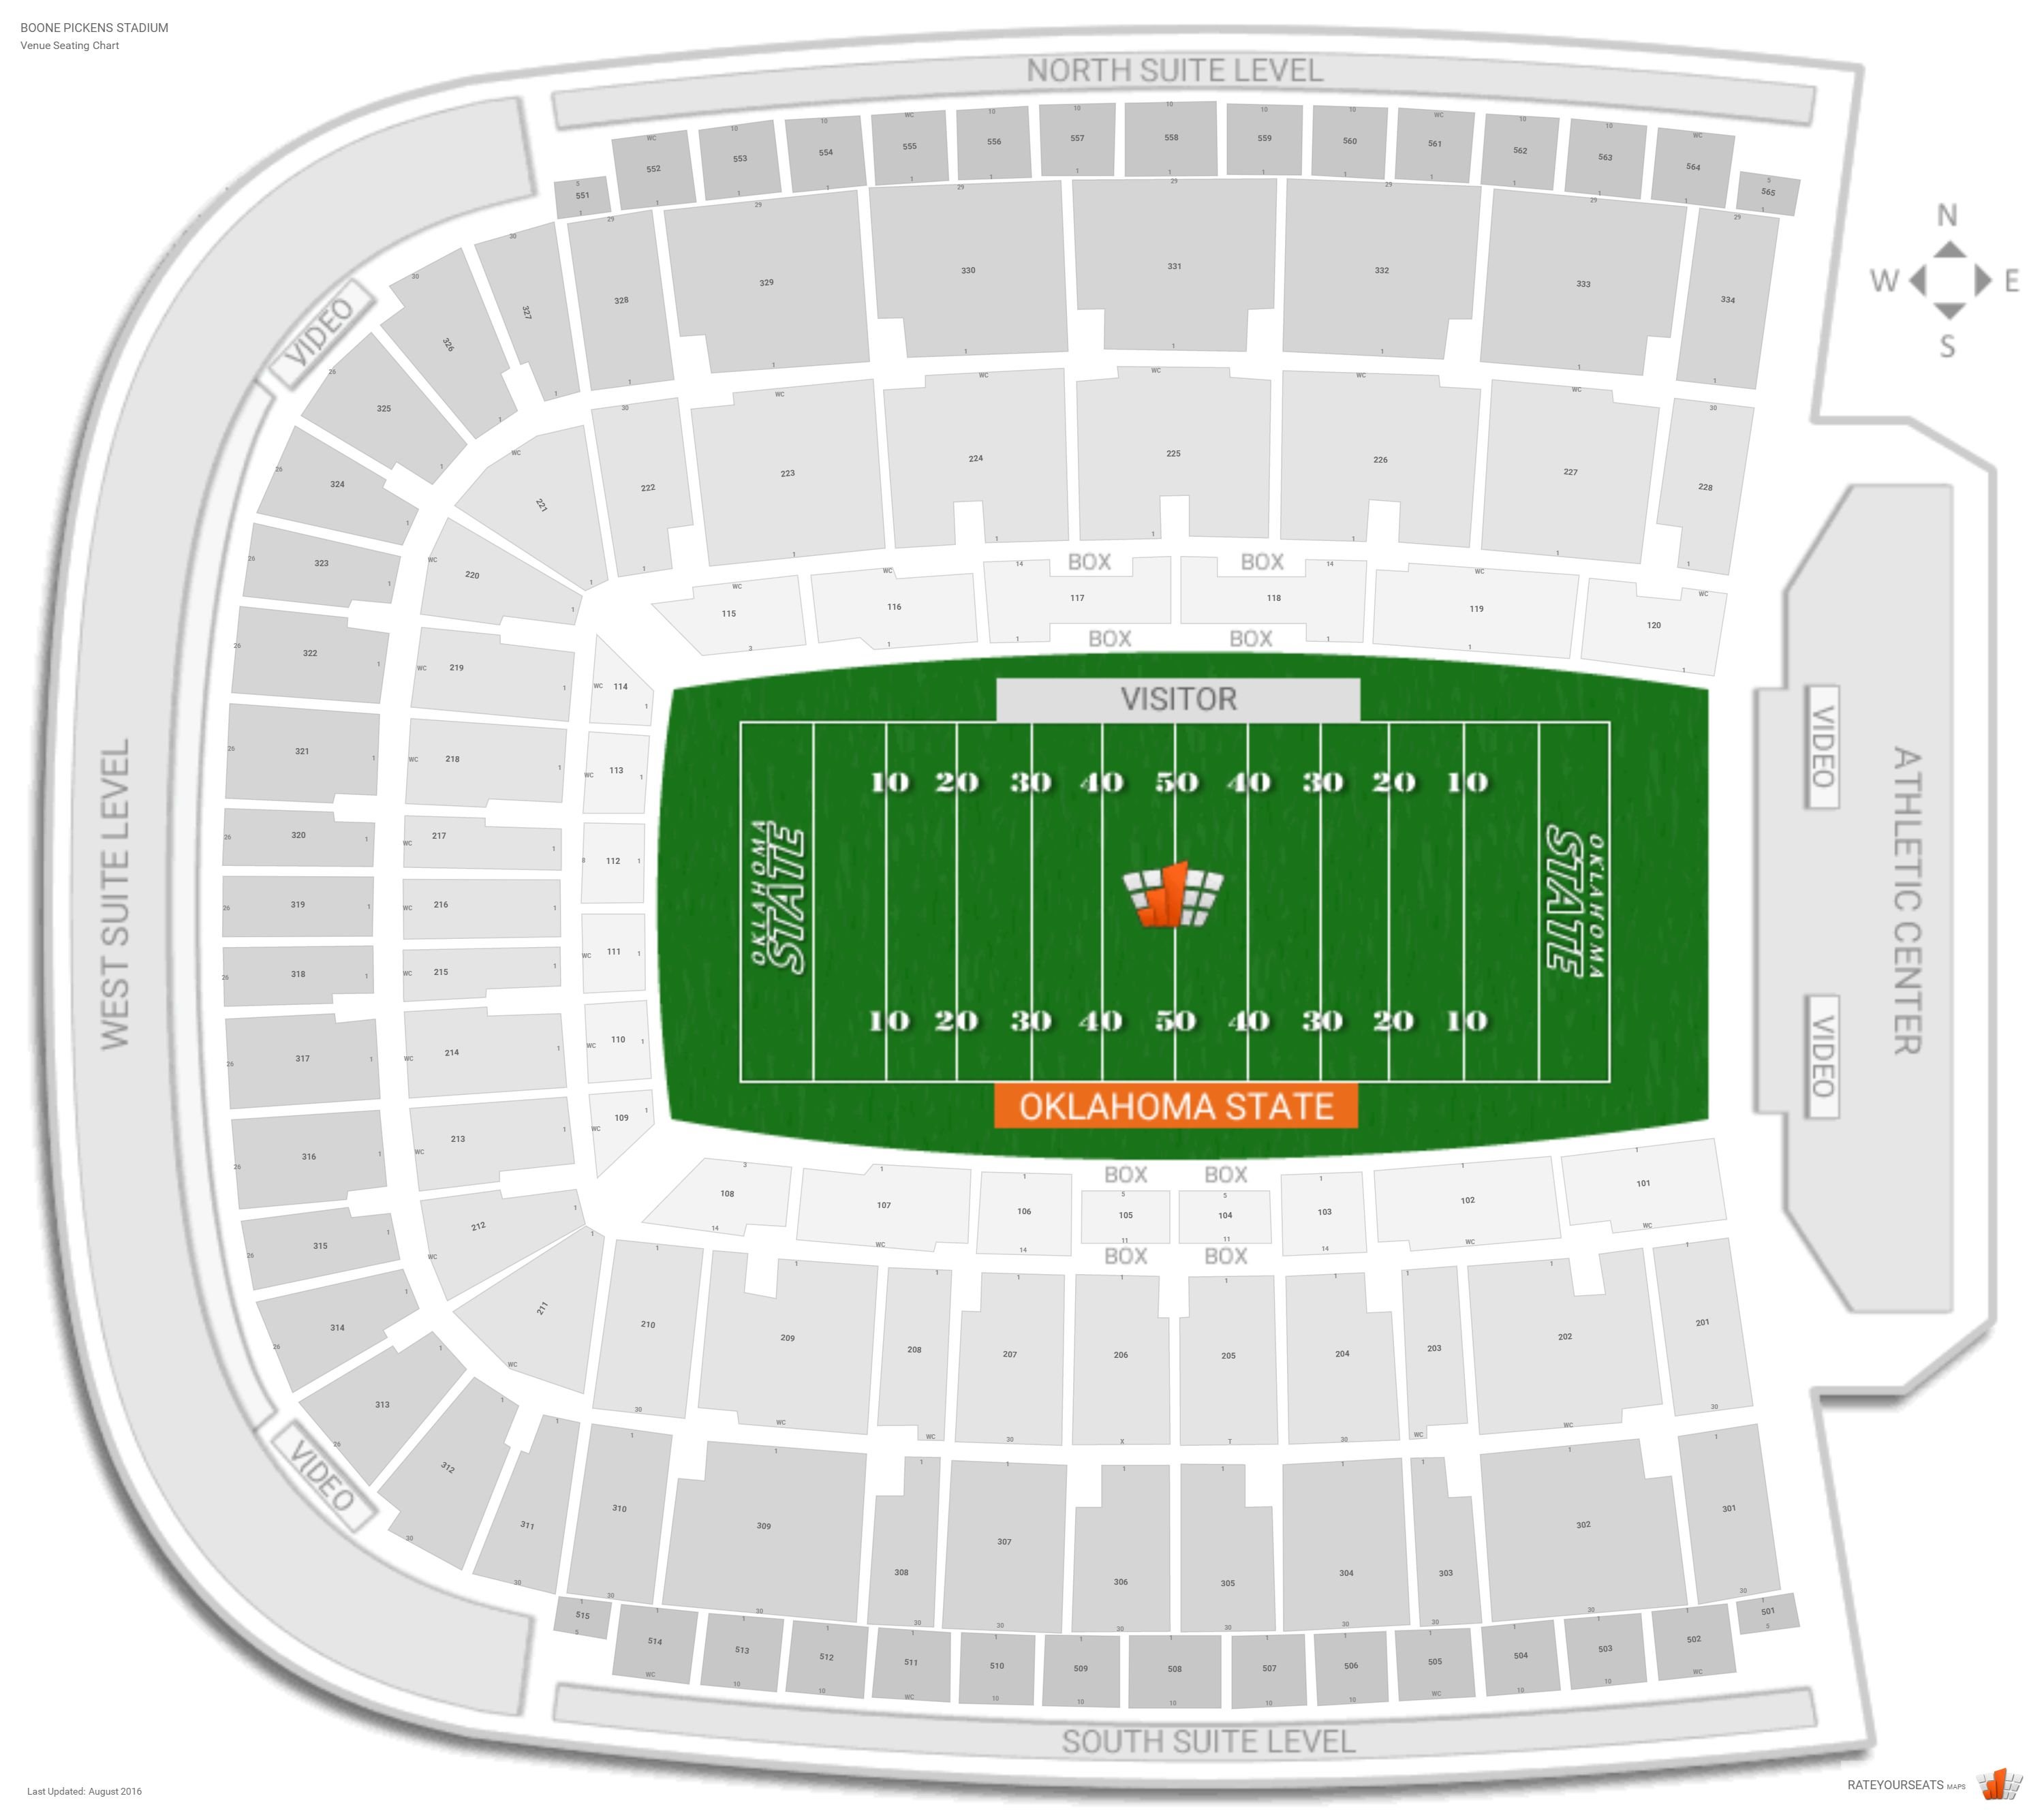 Boone Pickens Stadium (Oklahoma St.) Seating Guide - RateYourSeats.com